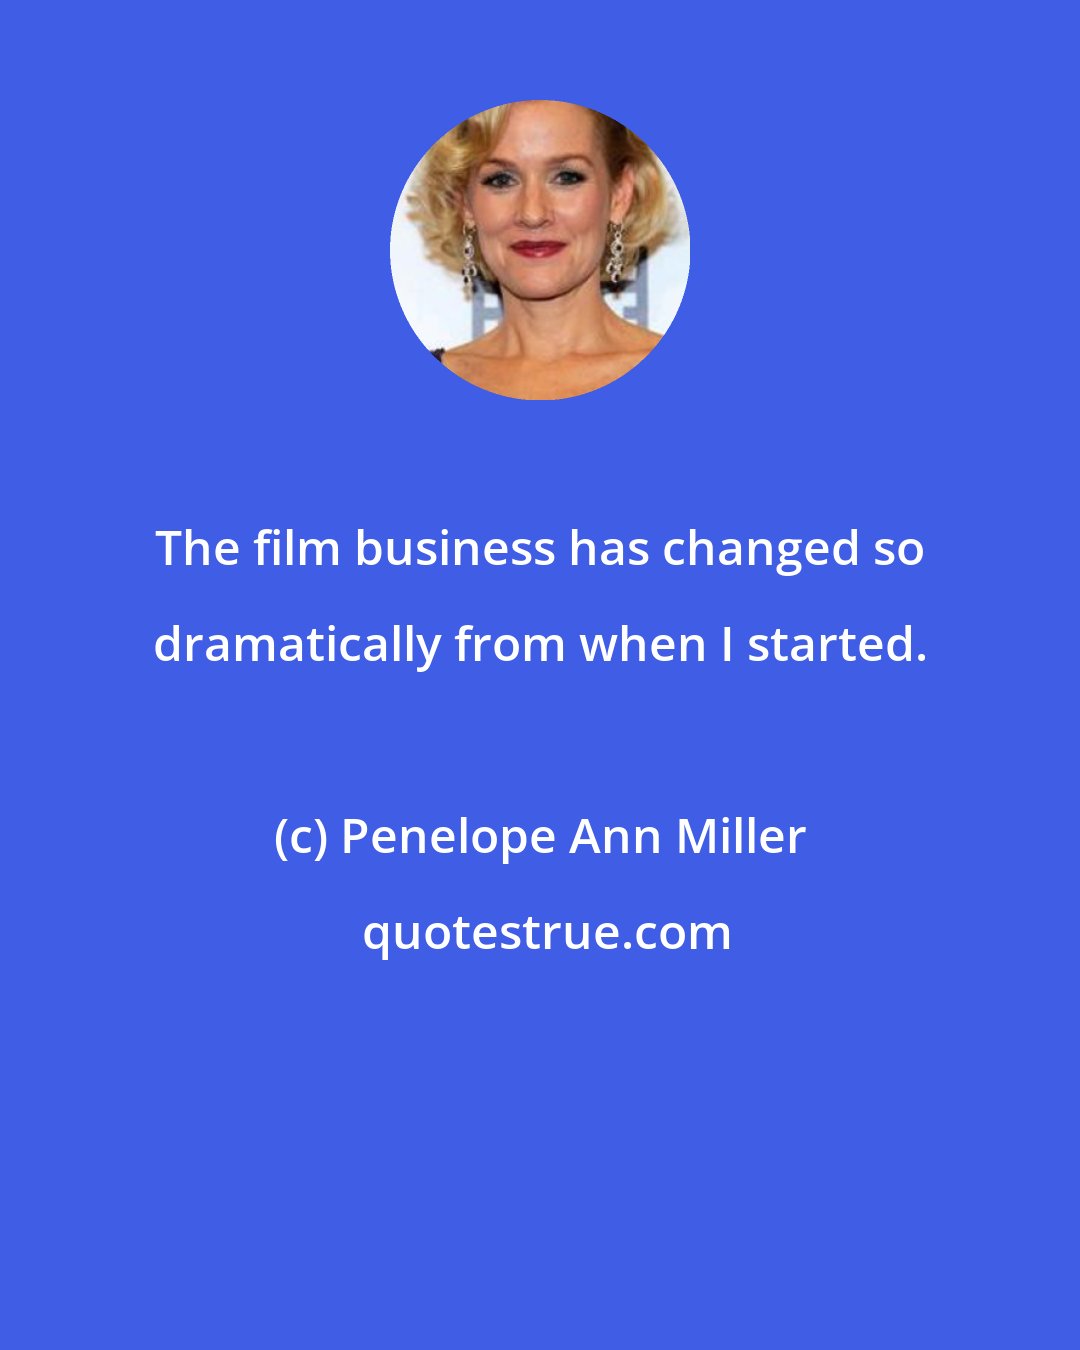 Penelope Ann Miller: The film business has changed so dramatically from when I started.